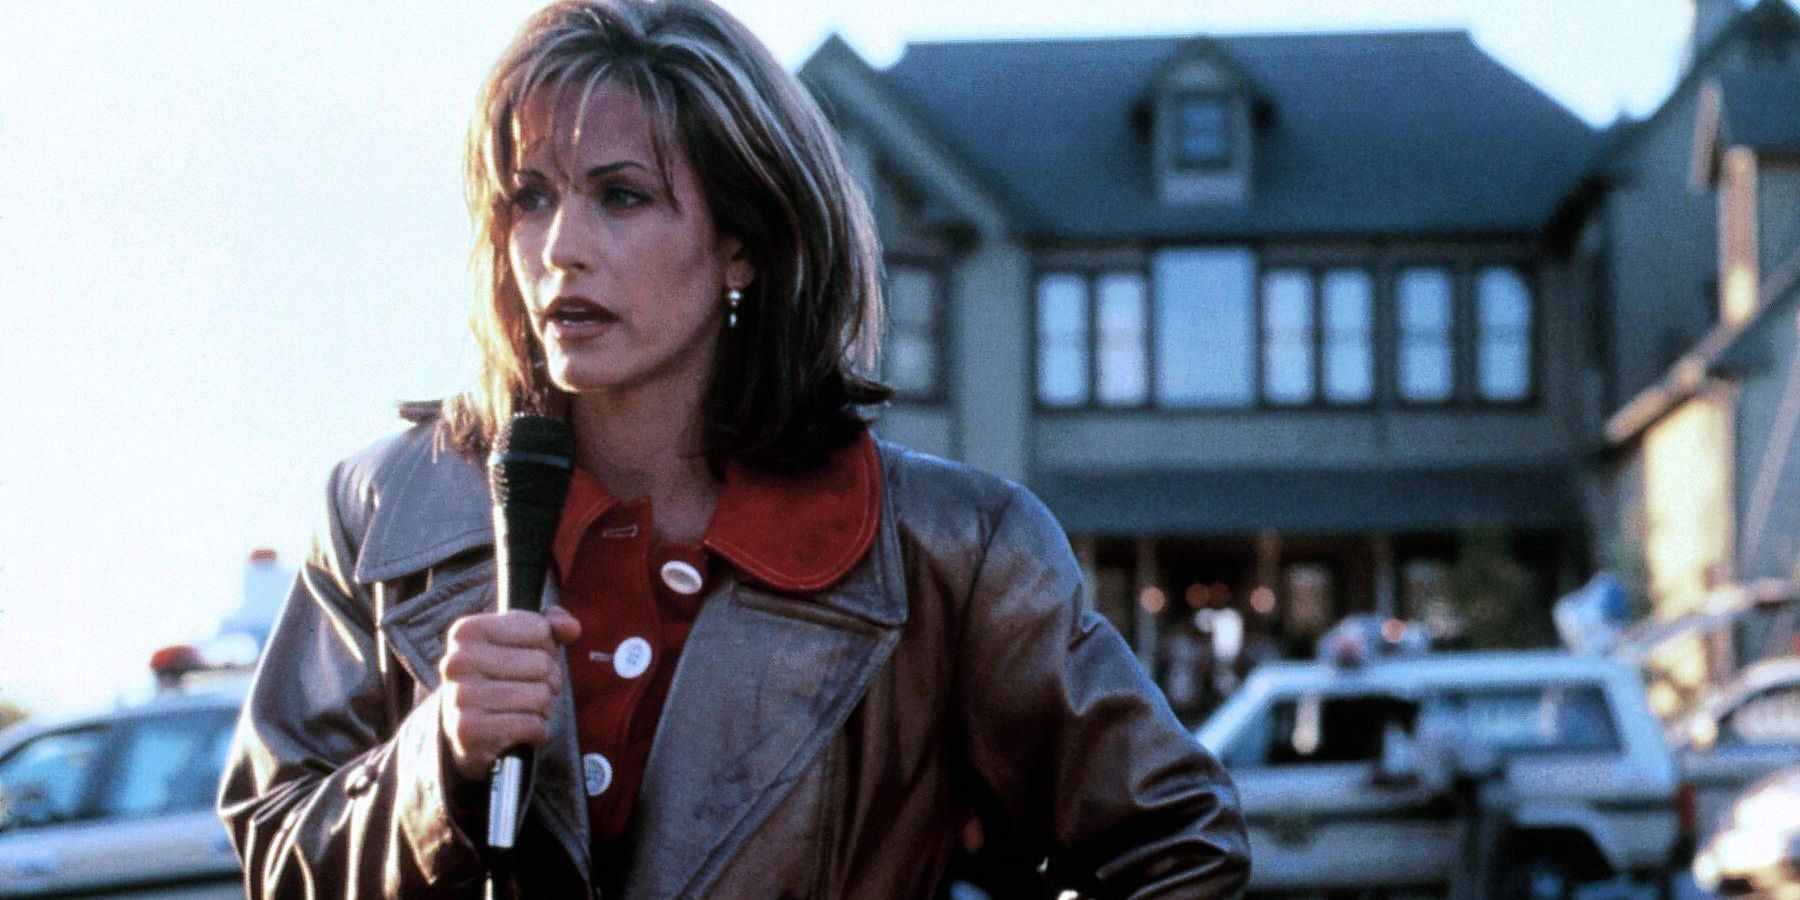 Which Horror Movie Final Girl Are You Based On Your Zodiac Sign